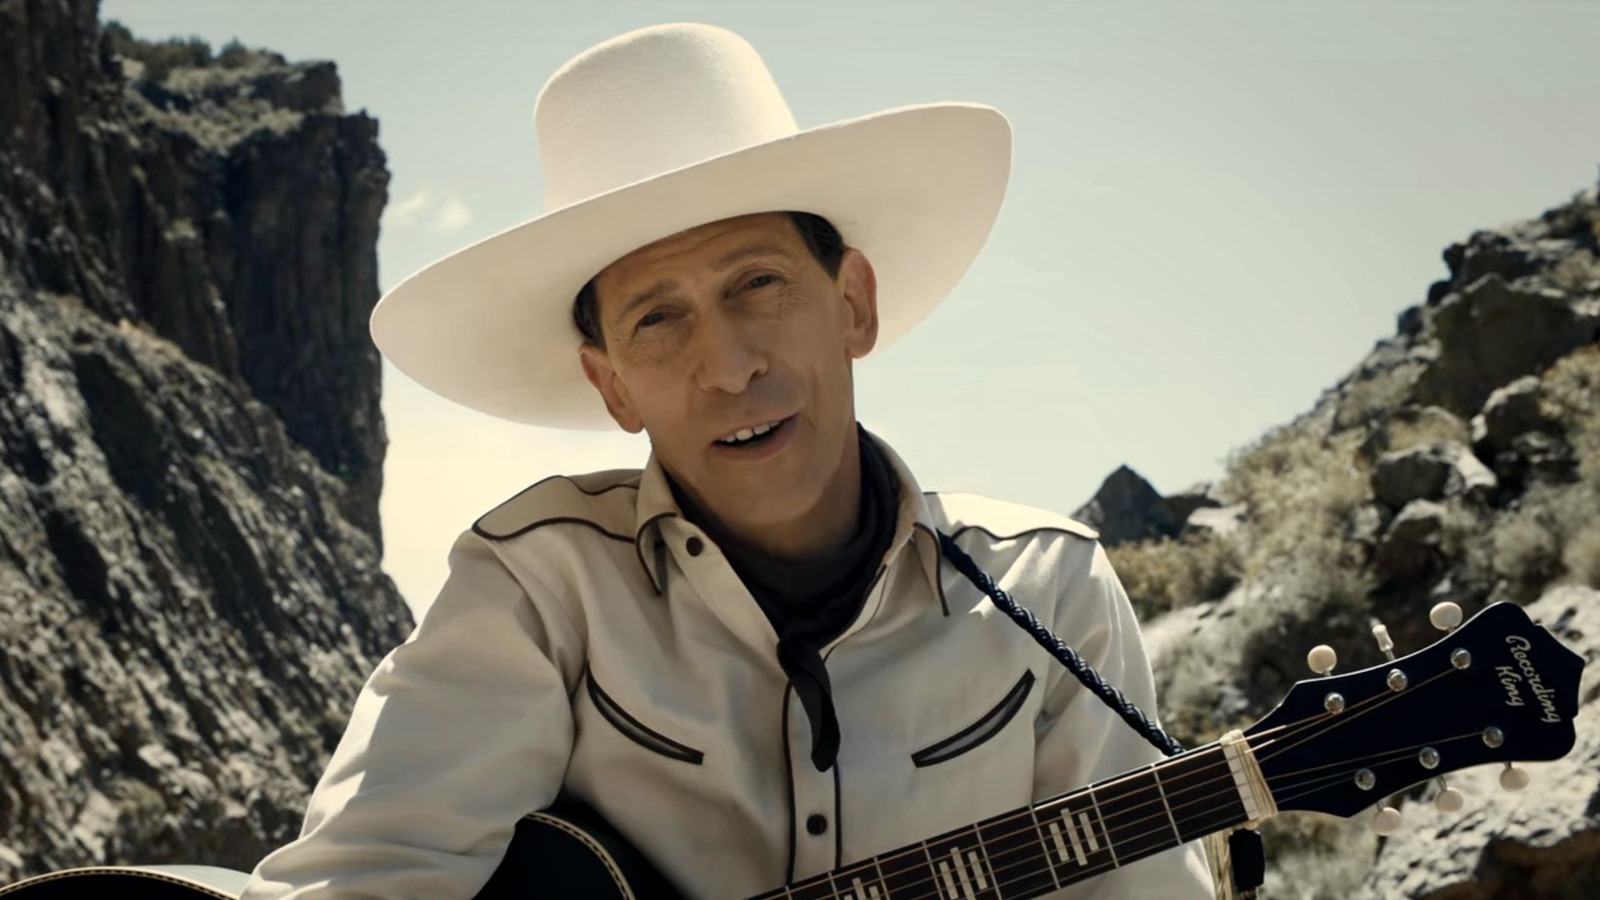 Filming Locations: Where was The Ballad of Buster Scruggs filmed?